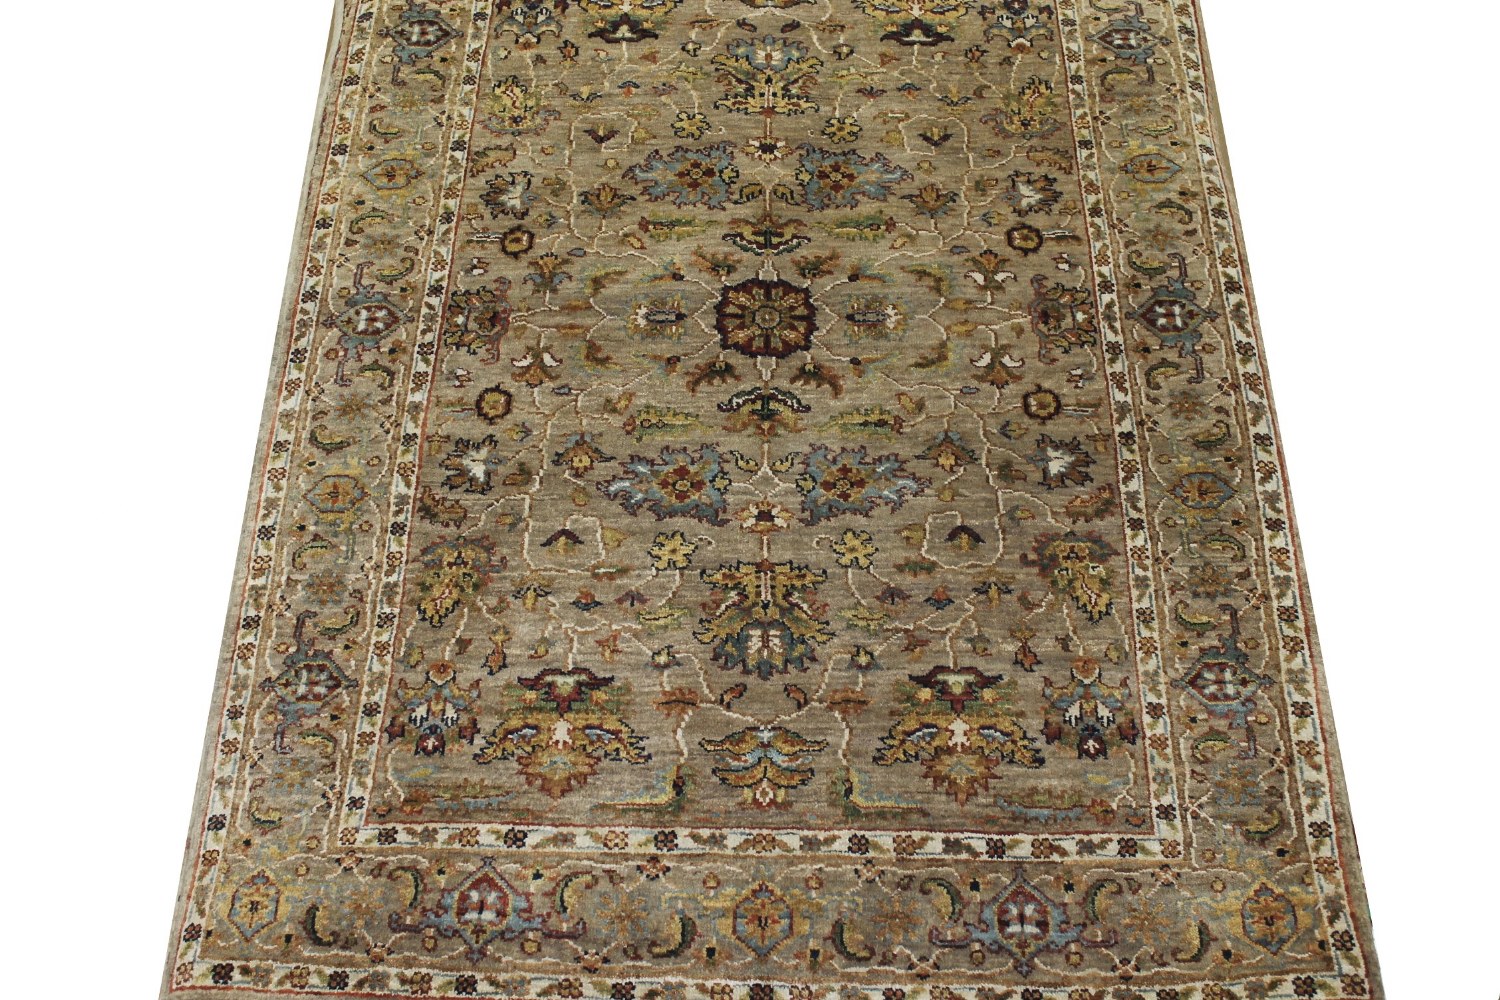 4x6 Antique Revival Hand Knotted Wool Area Rug - MR018796